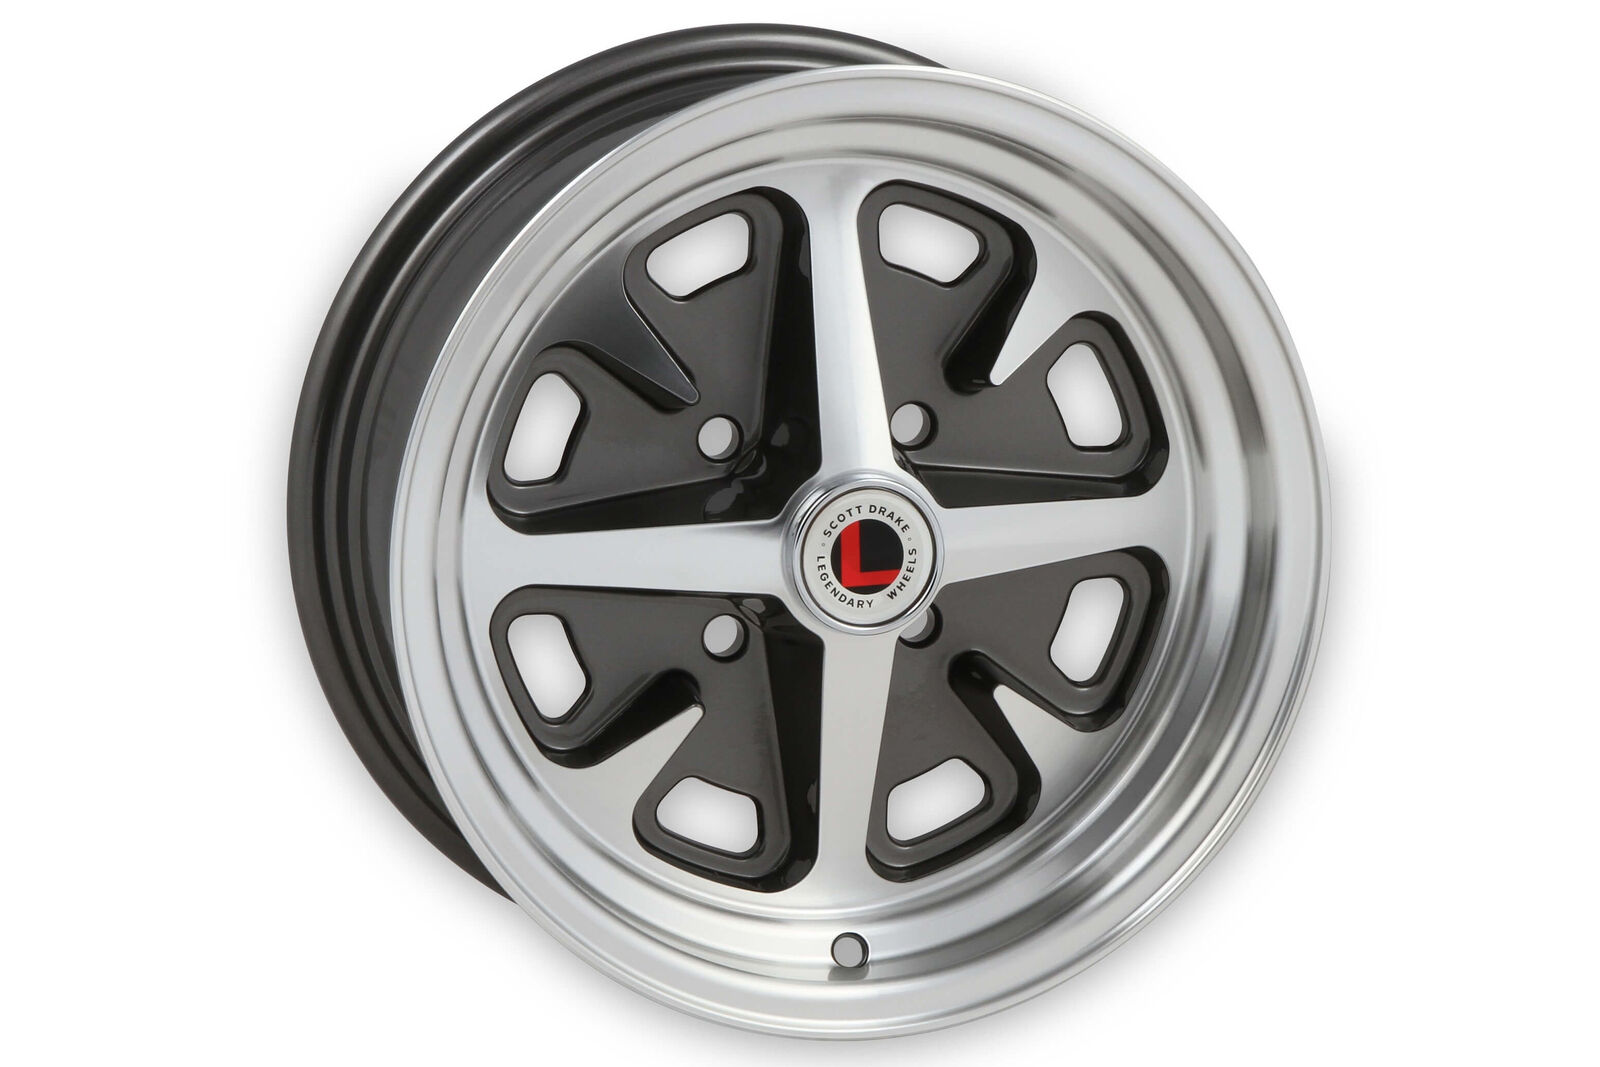 Legendary Wheels Magnum 400 - 15 x 6 in. - 4 x 4.5 - 3.75 bs - Charcoal/Machined